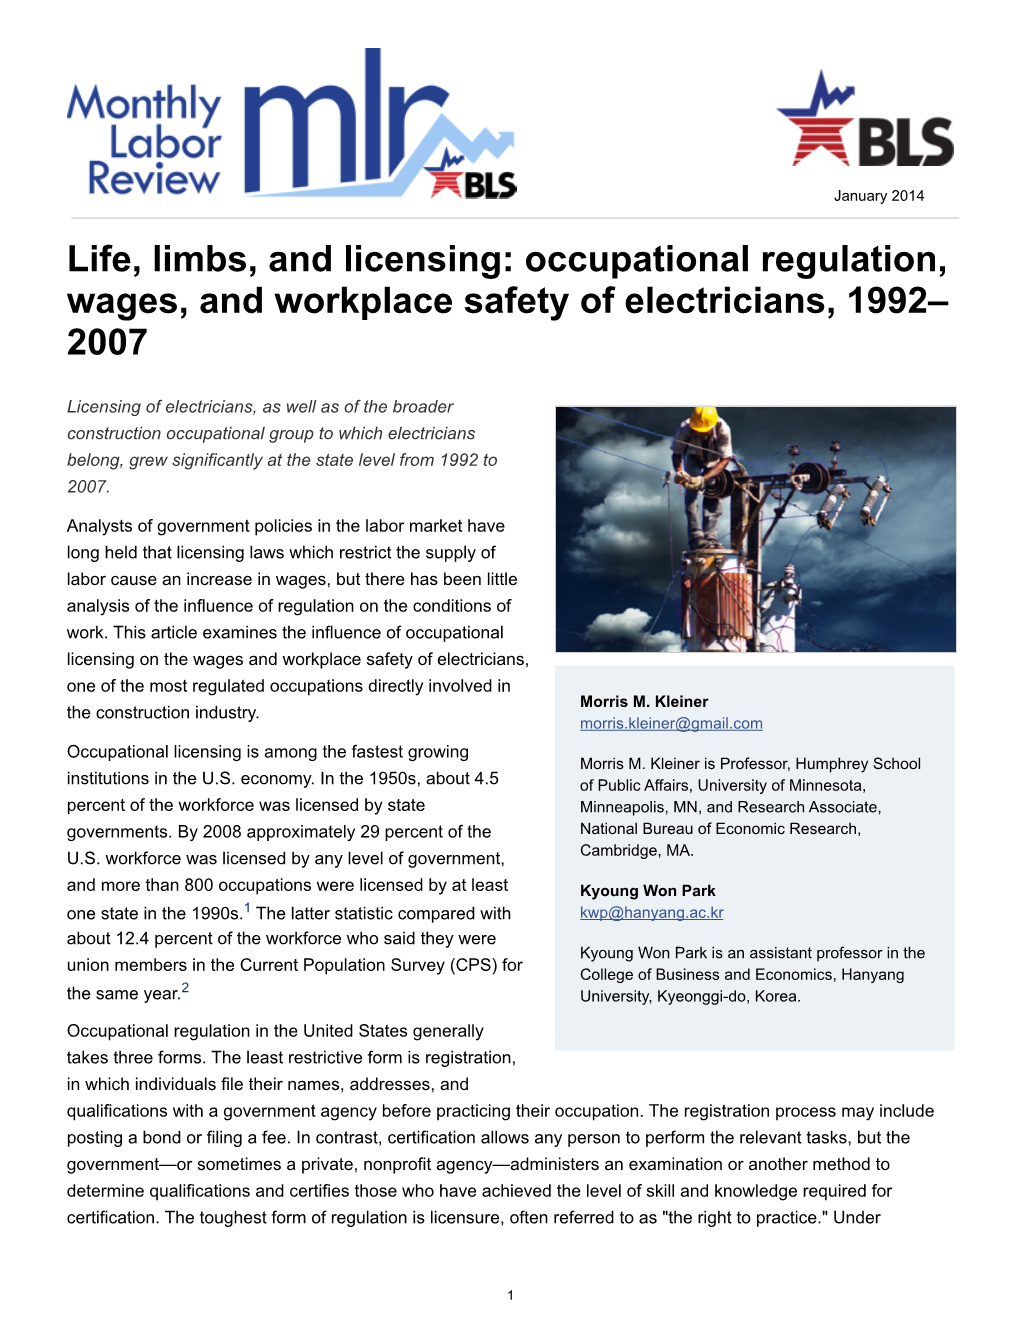 Life, Limbs, and Licensing: Occupational Regulation, Wages, and Workplace Safety of Electricians, 1992– 2007